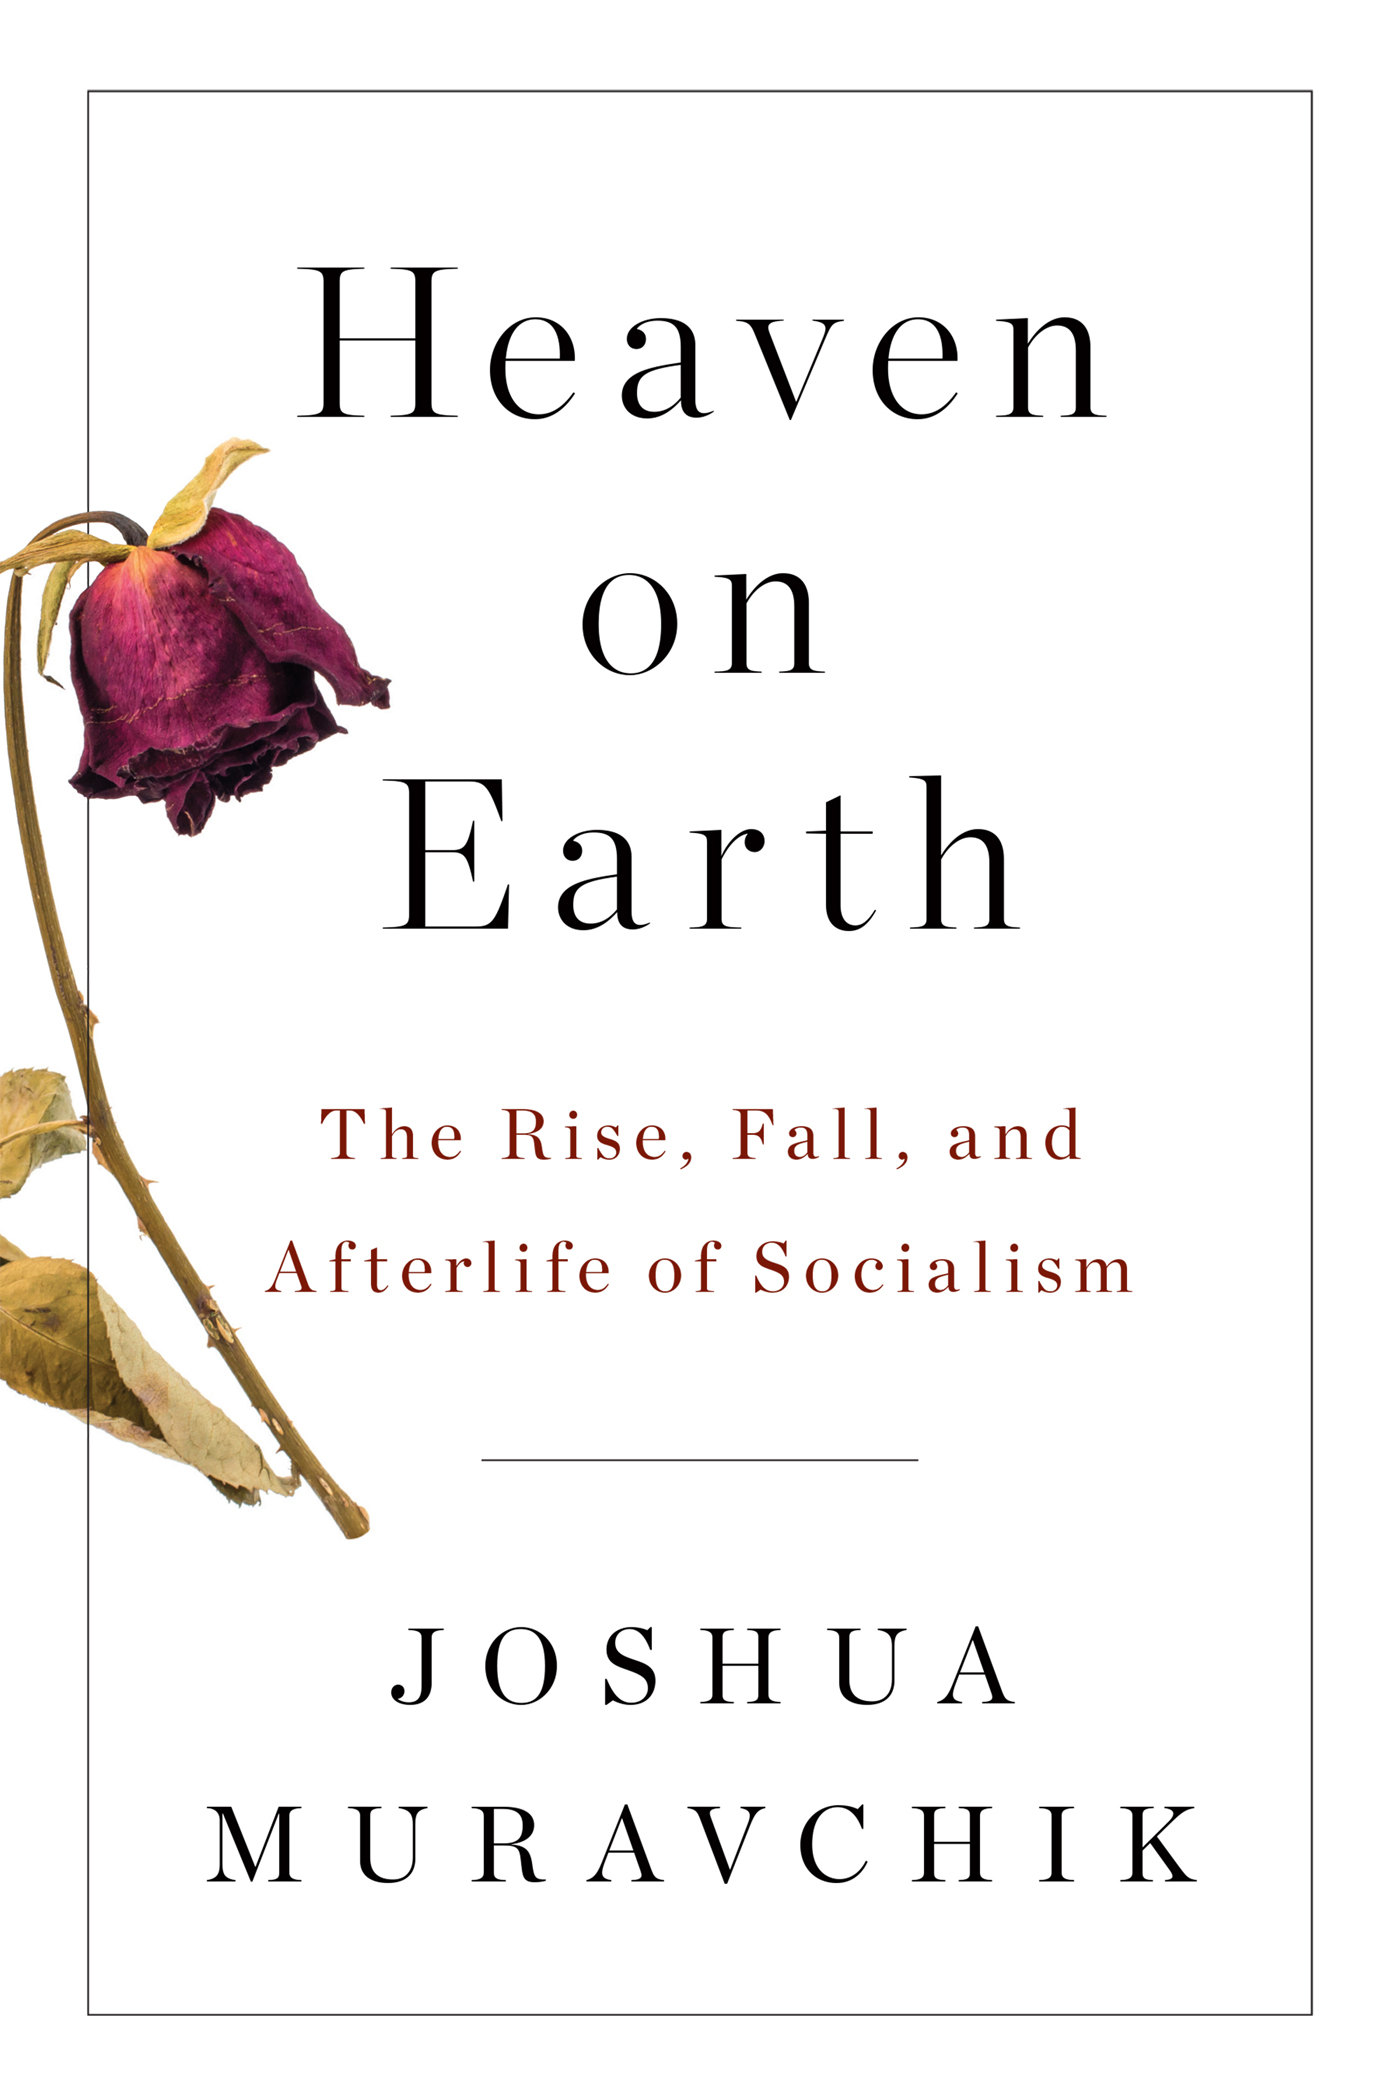 Heaven on Earth The Rise Fall and Afterlife of Socialism JOSHUA MURAVCHIK - photo 1